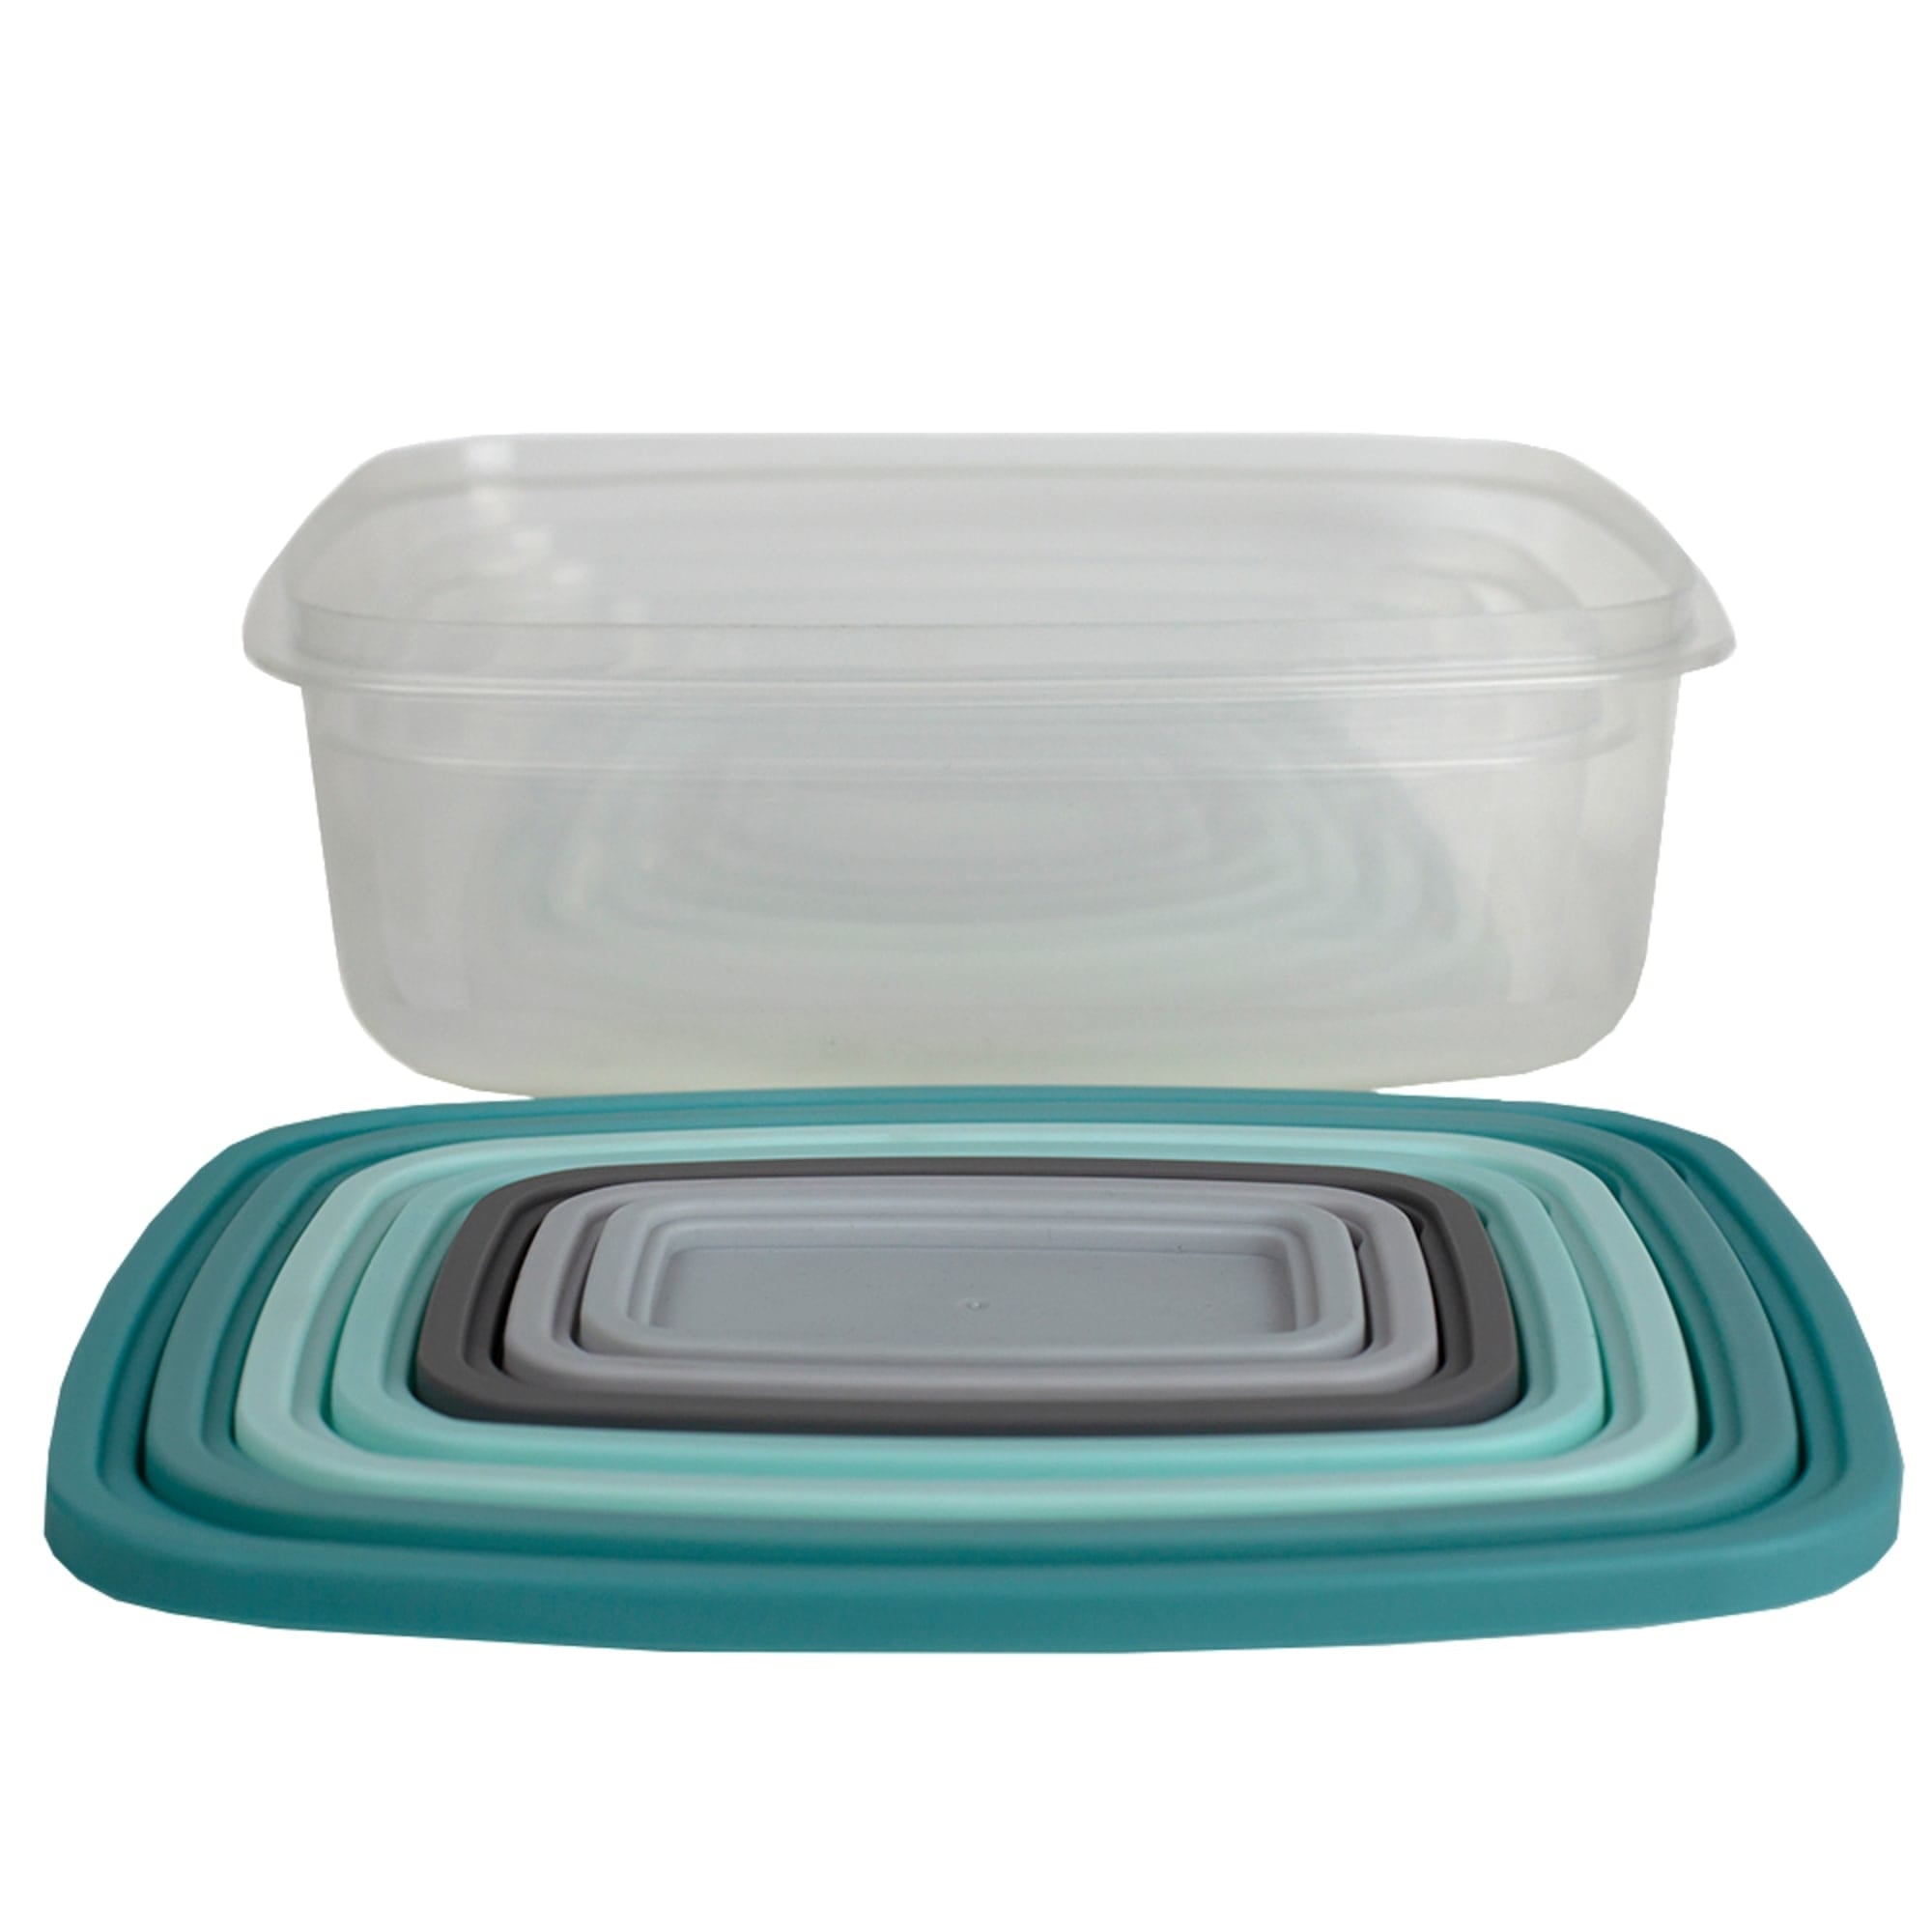 Home Basics 14 Piece Plastic Food Storage Container Set with Secure Fit Plastic Lids, Multi-Color $8.00 EACH, CASE PACK OF 6